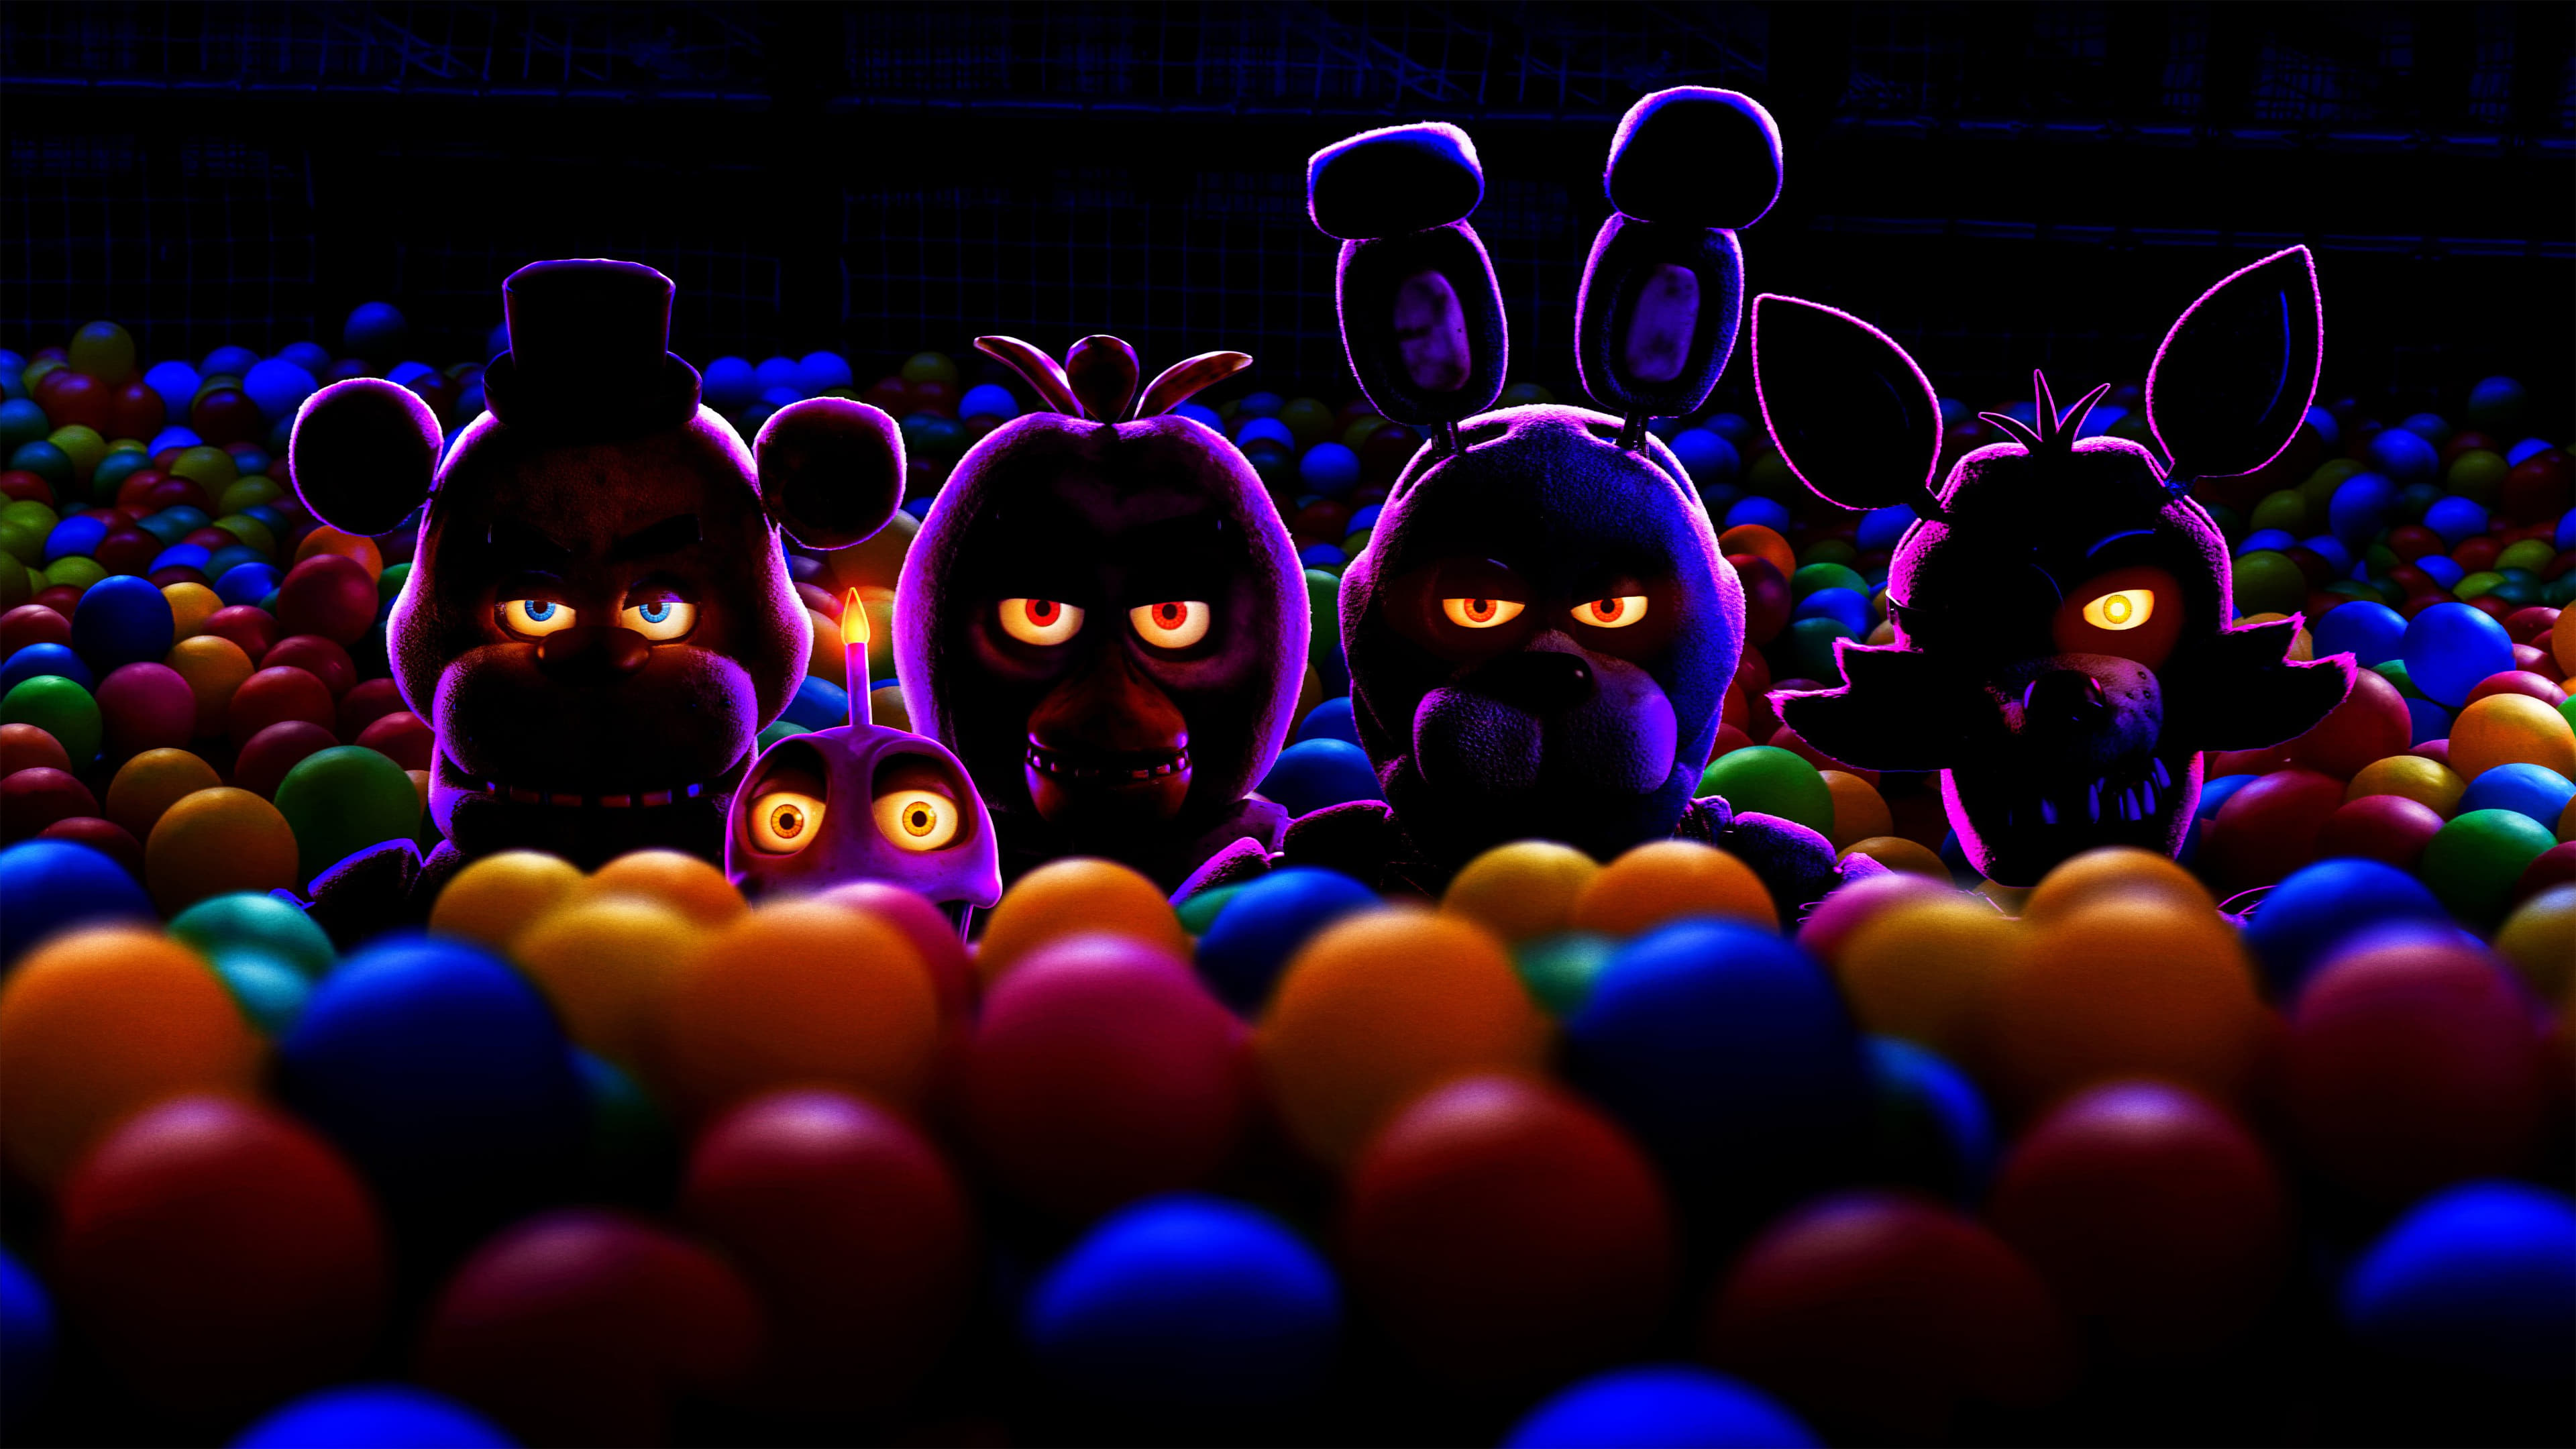 When Do FNAF Movie Tickets Go On Sale In UK?